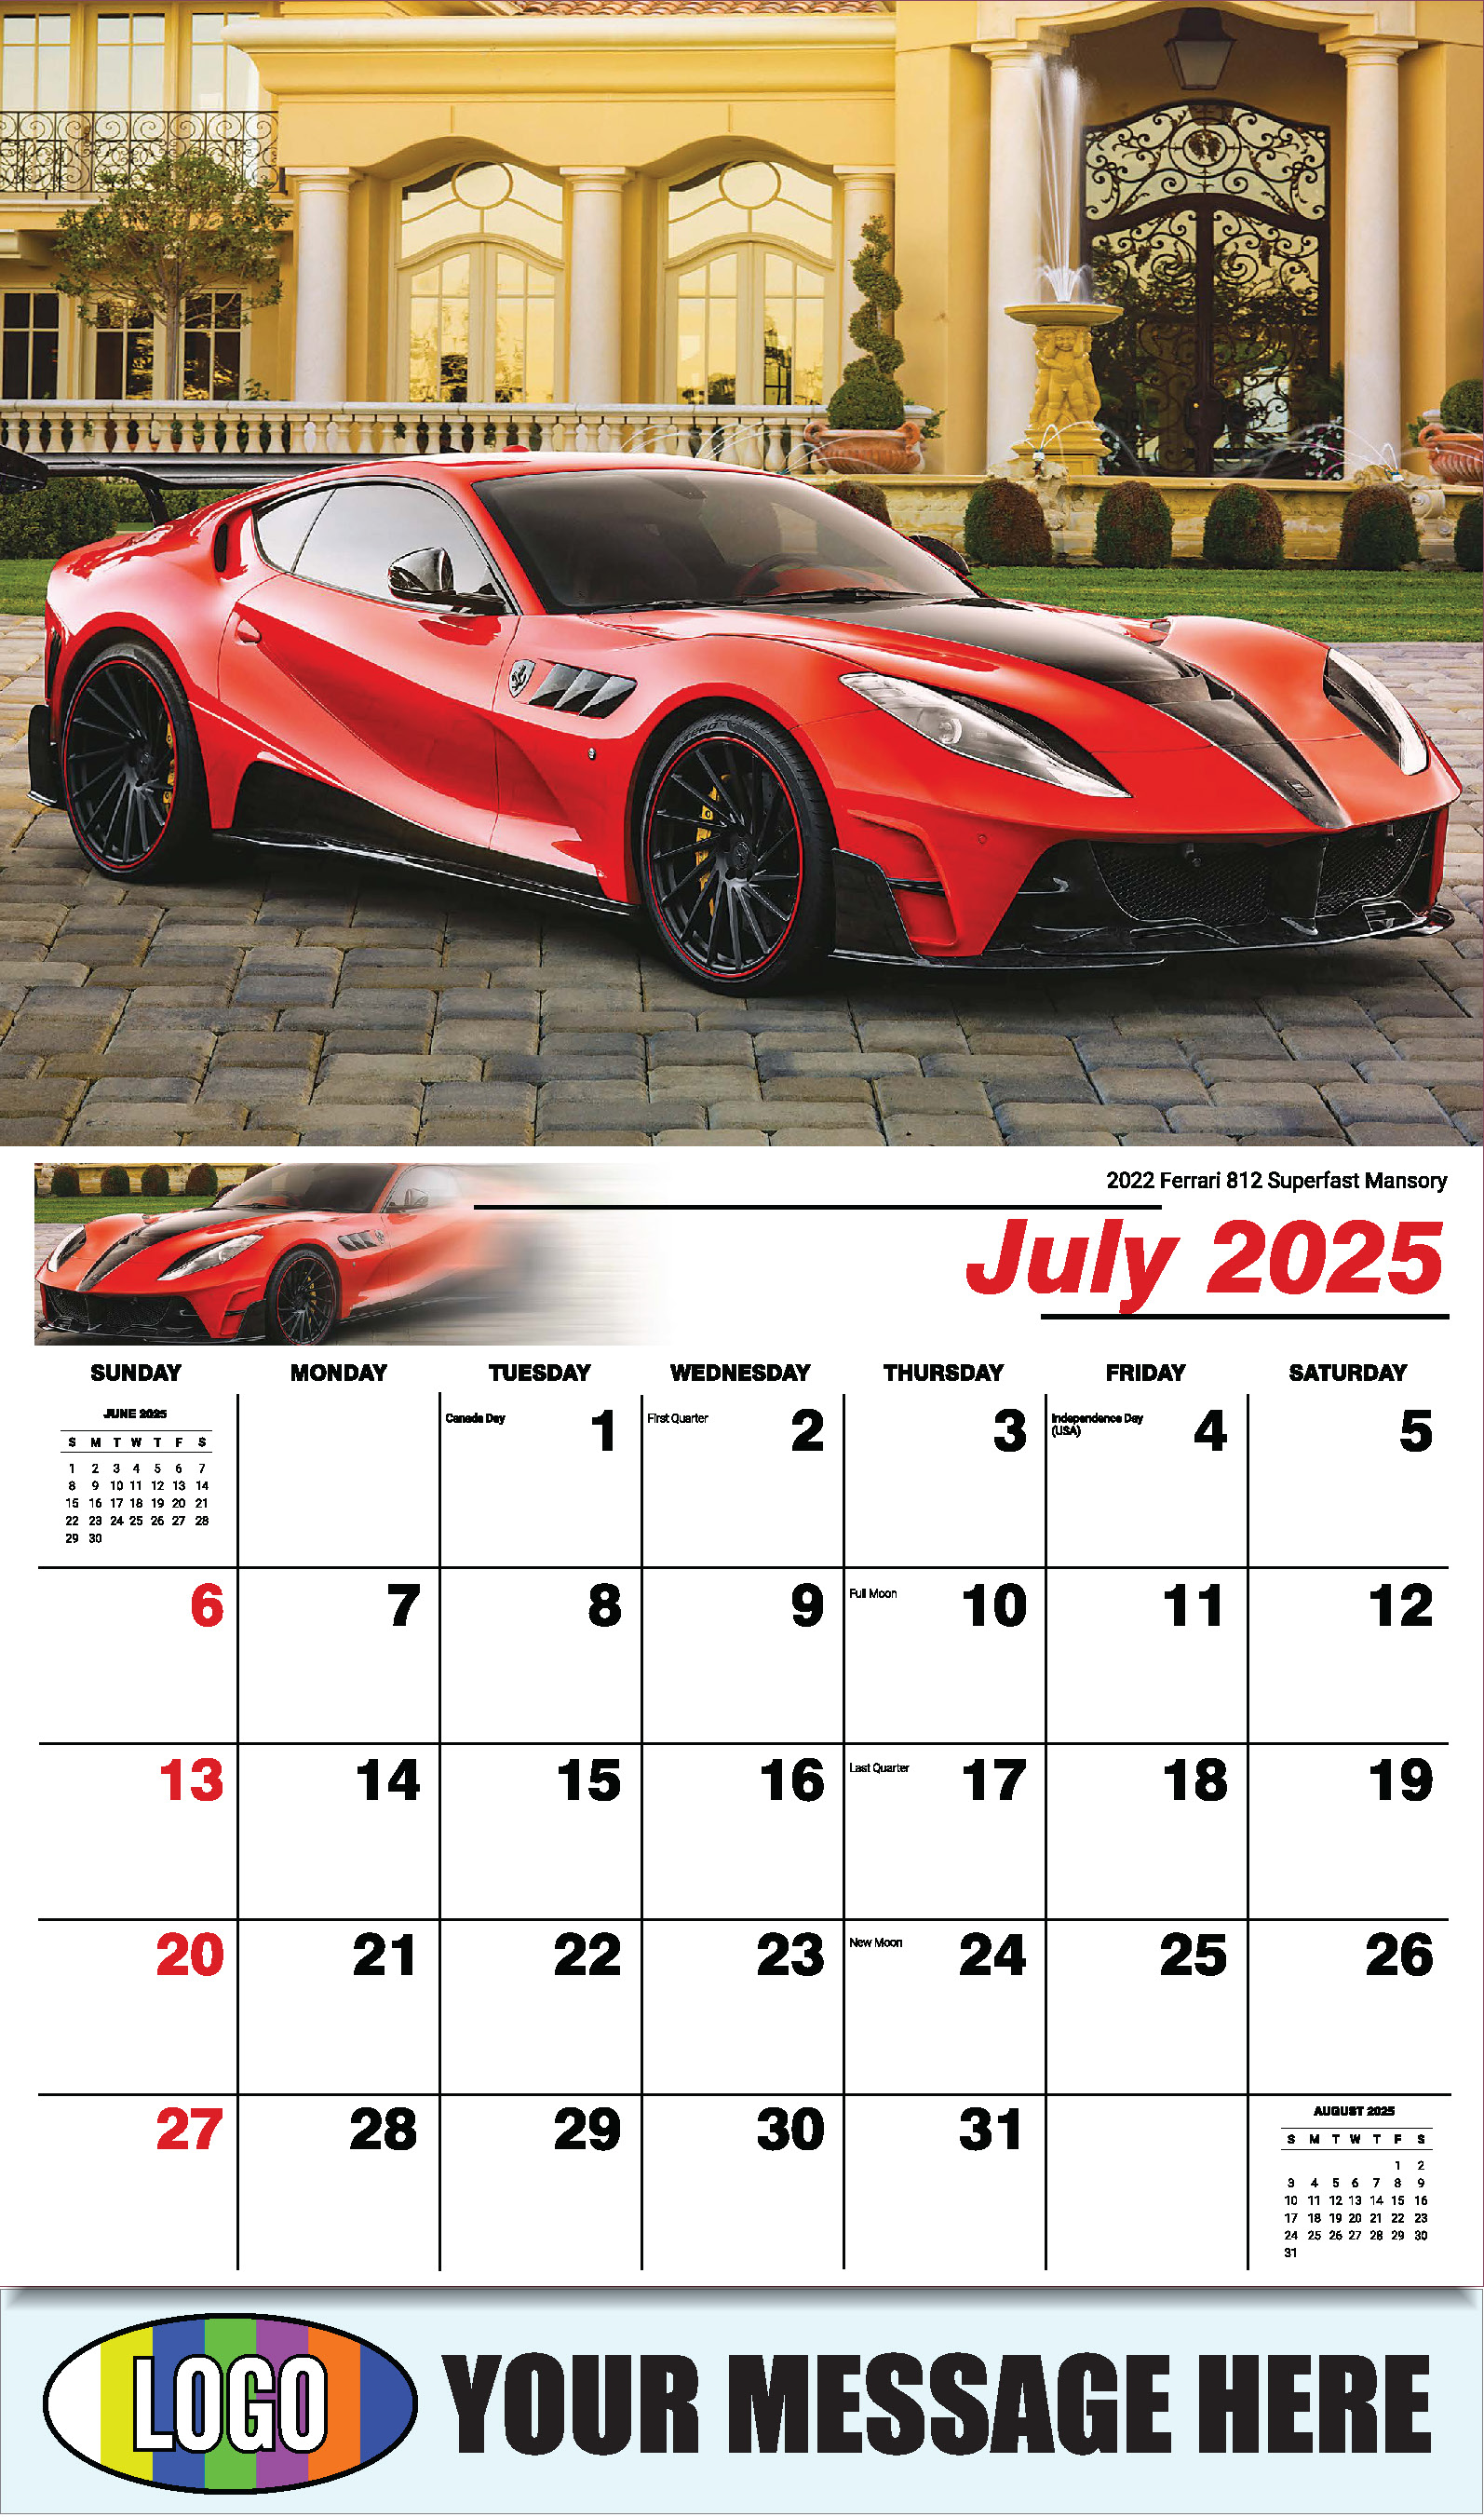 Exotic Cars 2025 Automotive Business Advertising Calendar - July